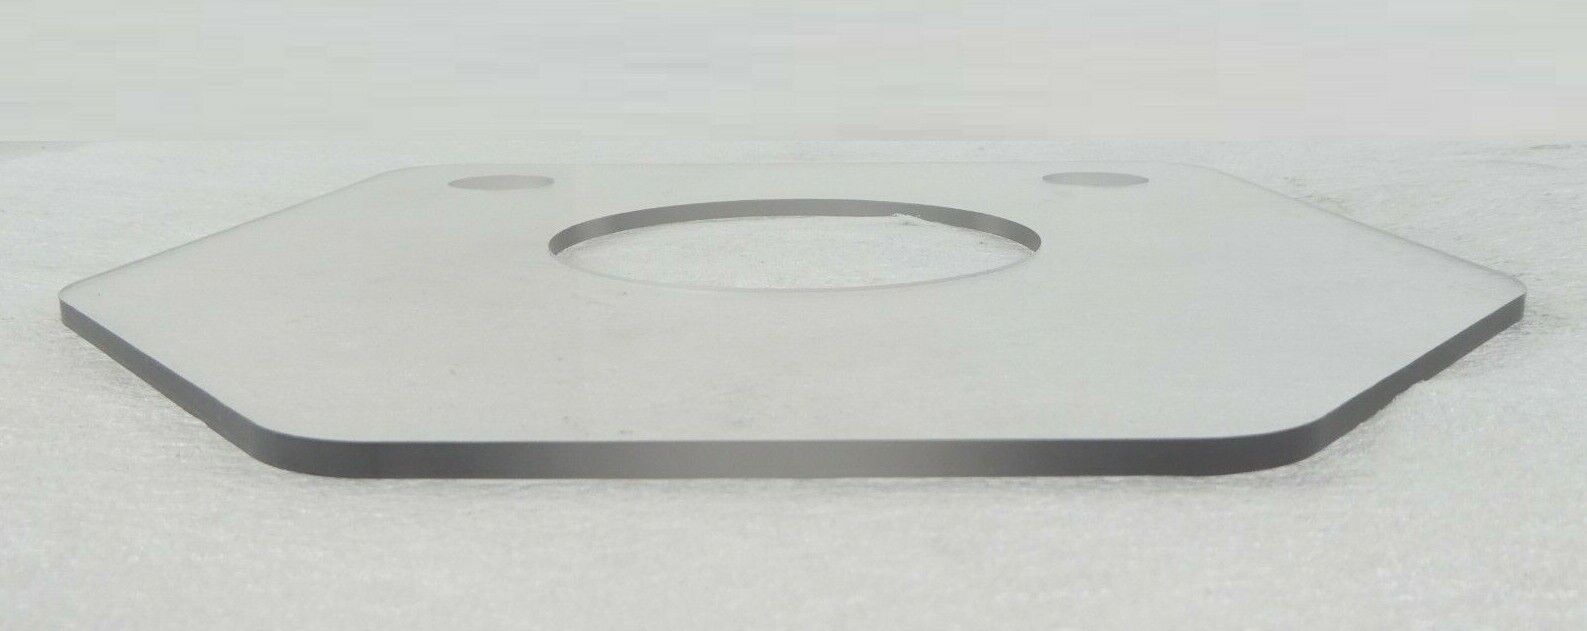 AMAT Applied Materials 0020-34753 125mm Centering Plate New Surplus